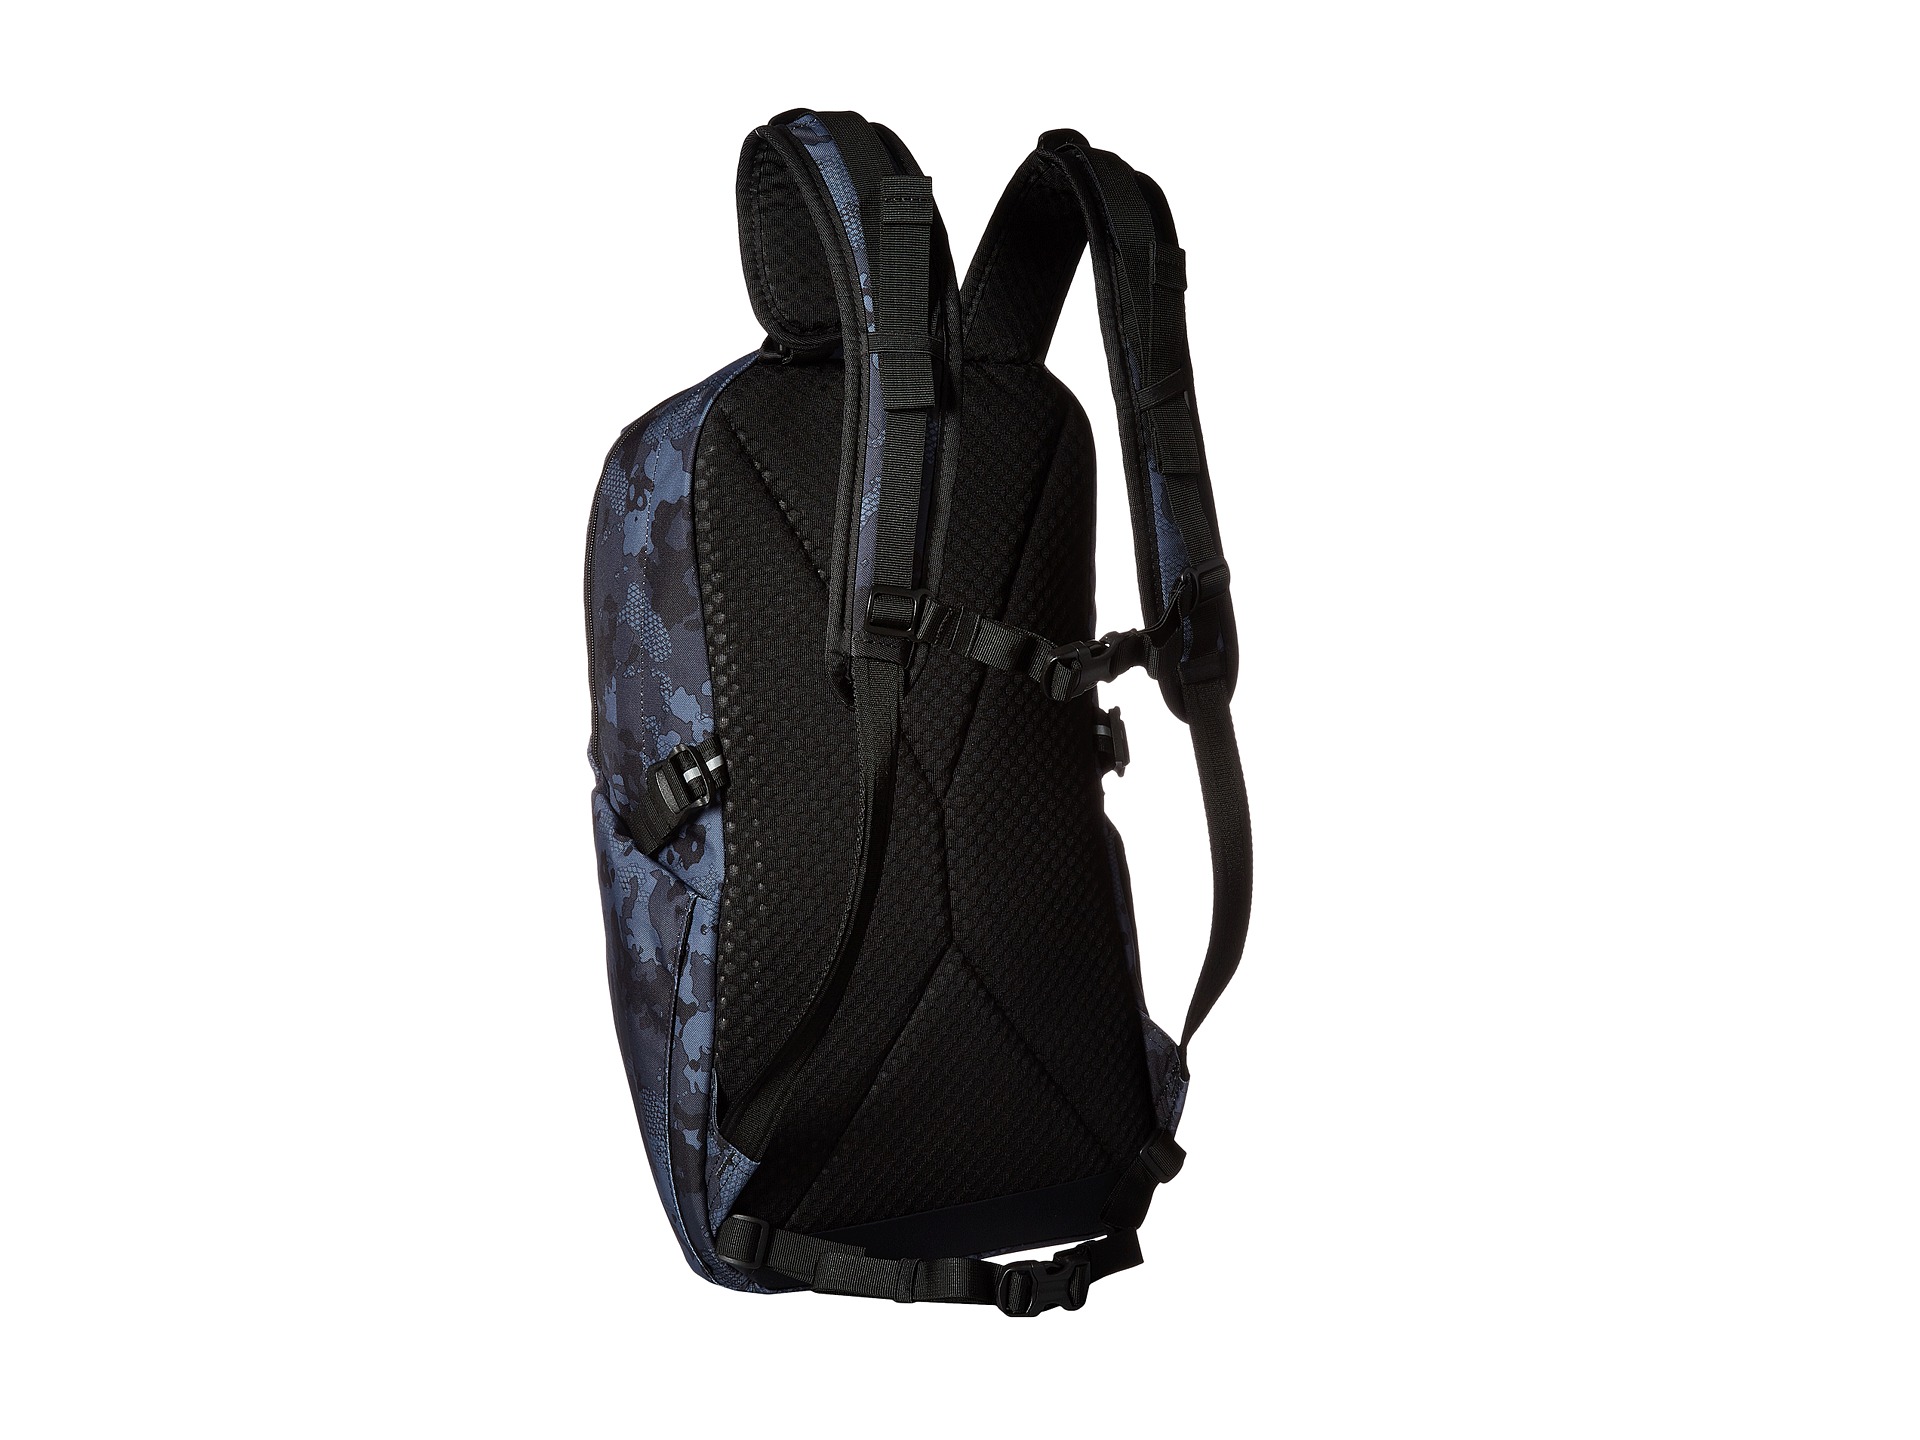 Pacsafe Vibe 25 Anti-Theft 25L Backpack at Zappos.com